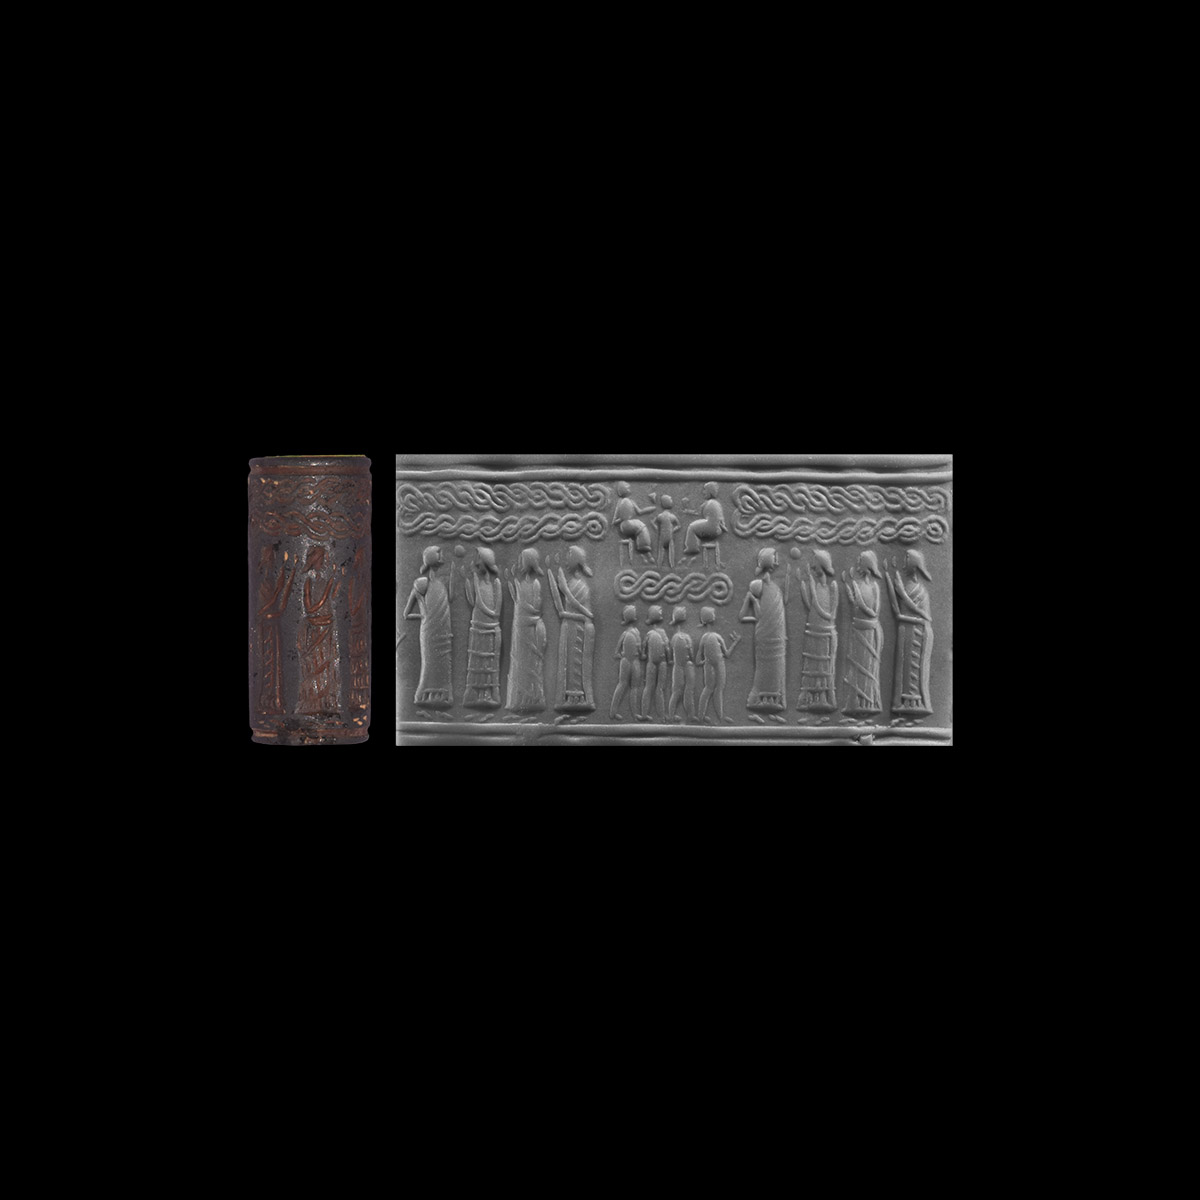 Western Asiatic Style Cylinder Seal